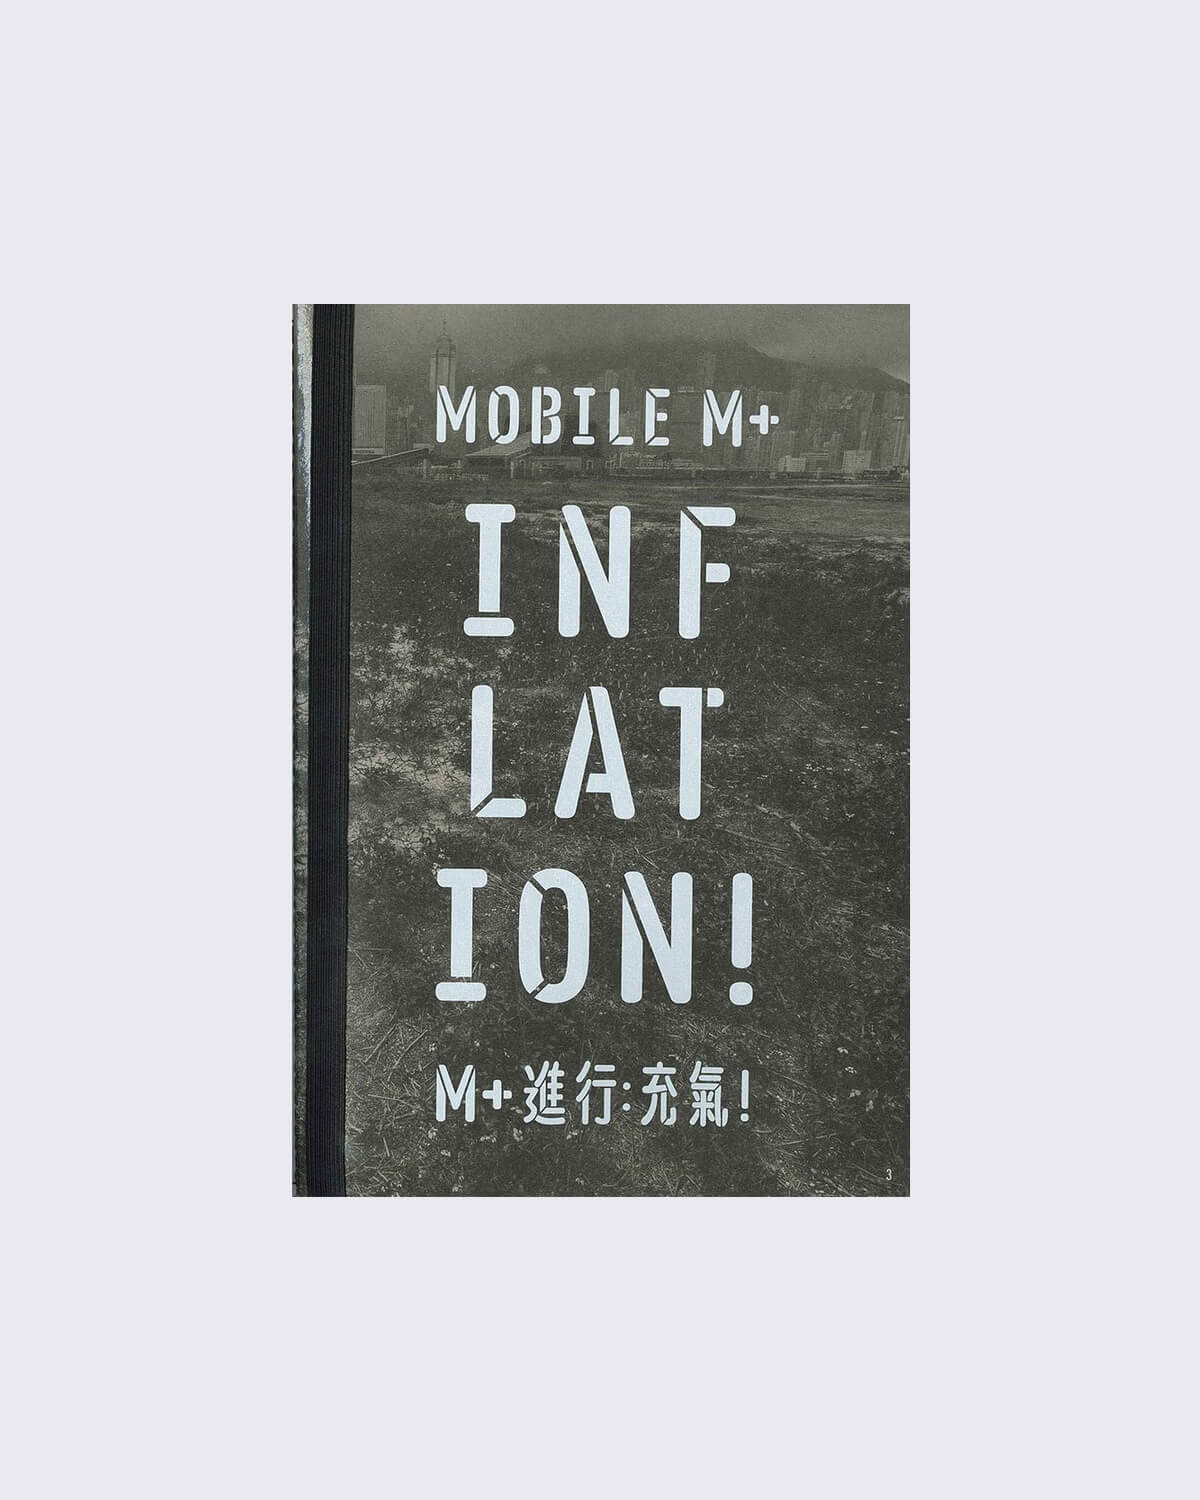 Mobile M+: Inflation!